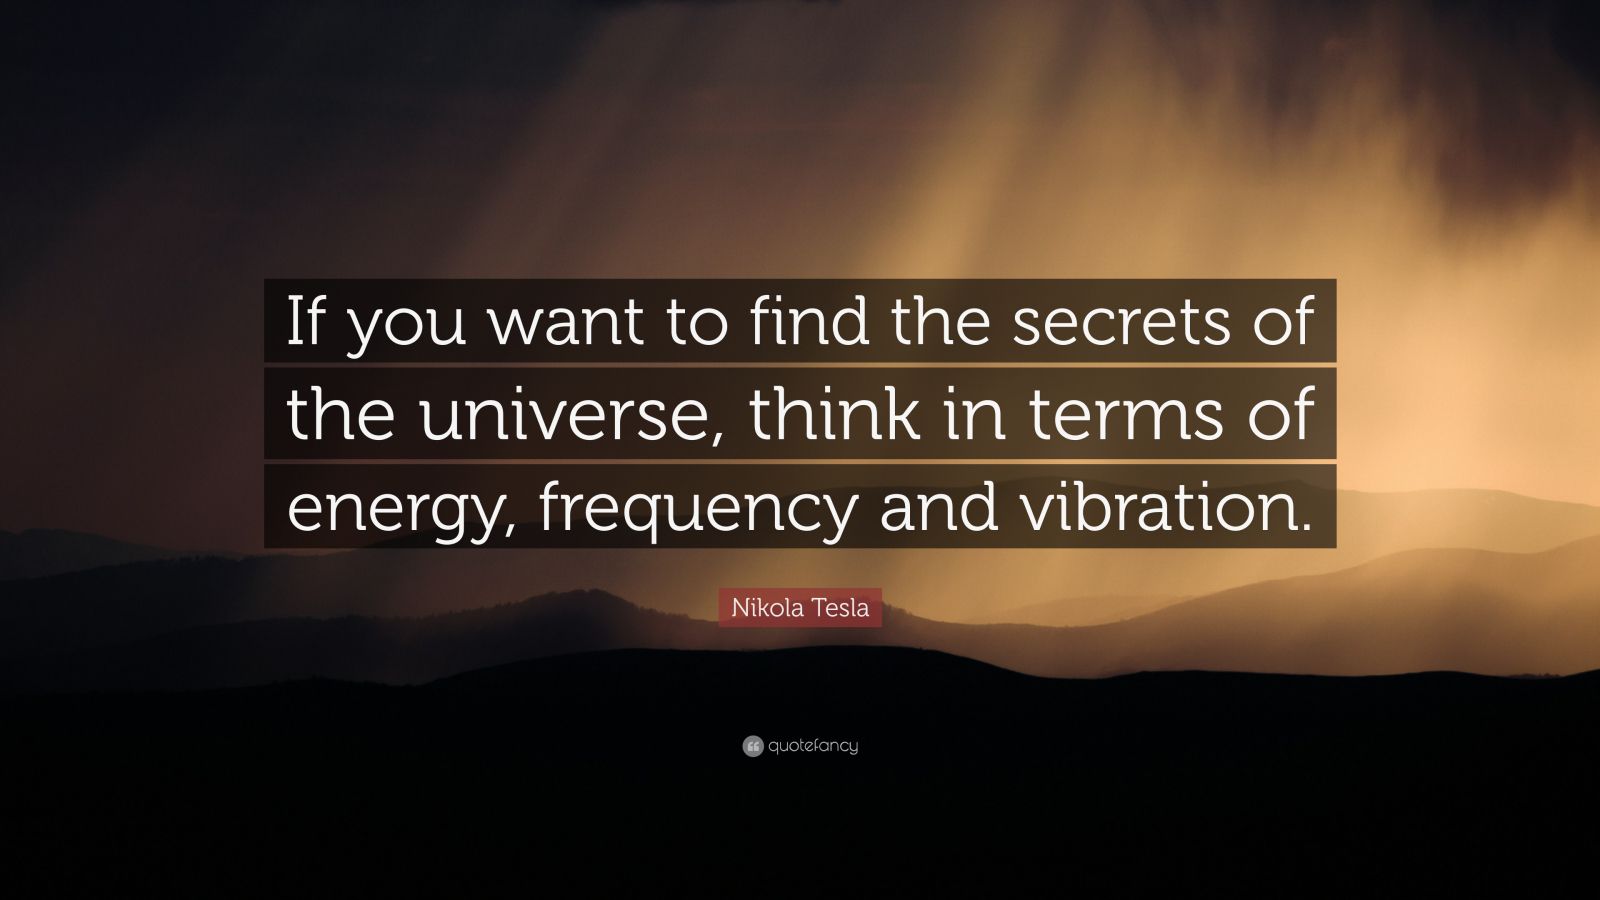 Nikola Tesla Quote: “If you want to find the secrets of the universe